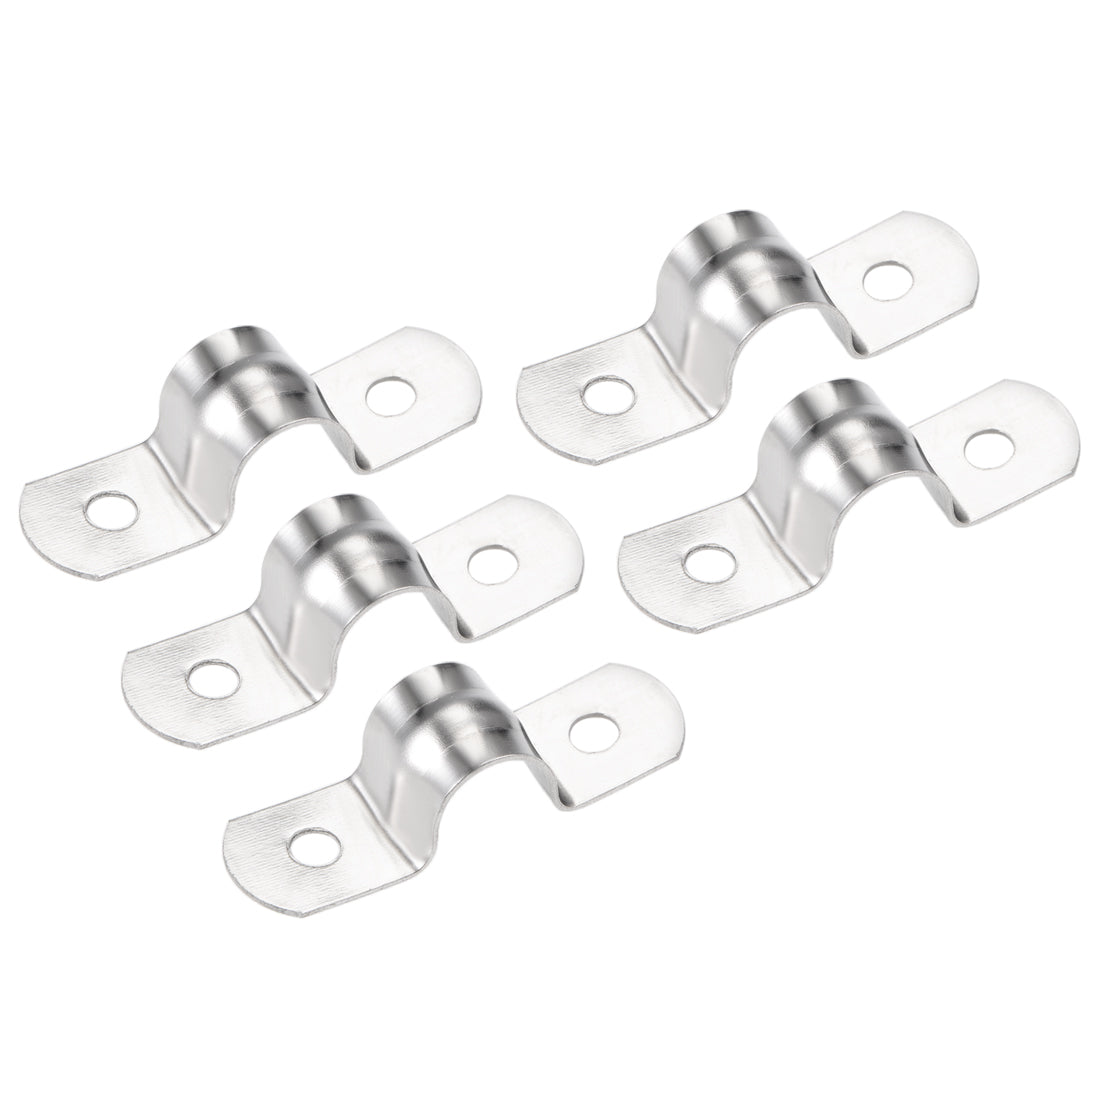 uxcell Uxcell U Shaped Conduit Clamp Saddle Strap Tube Pipe Clip Stainless Steel M10 5Pcs